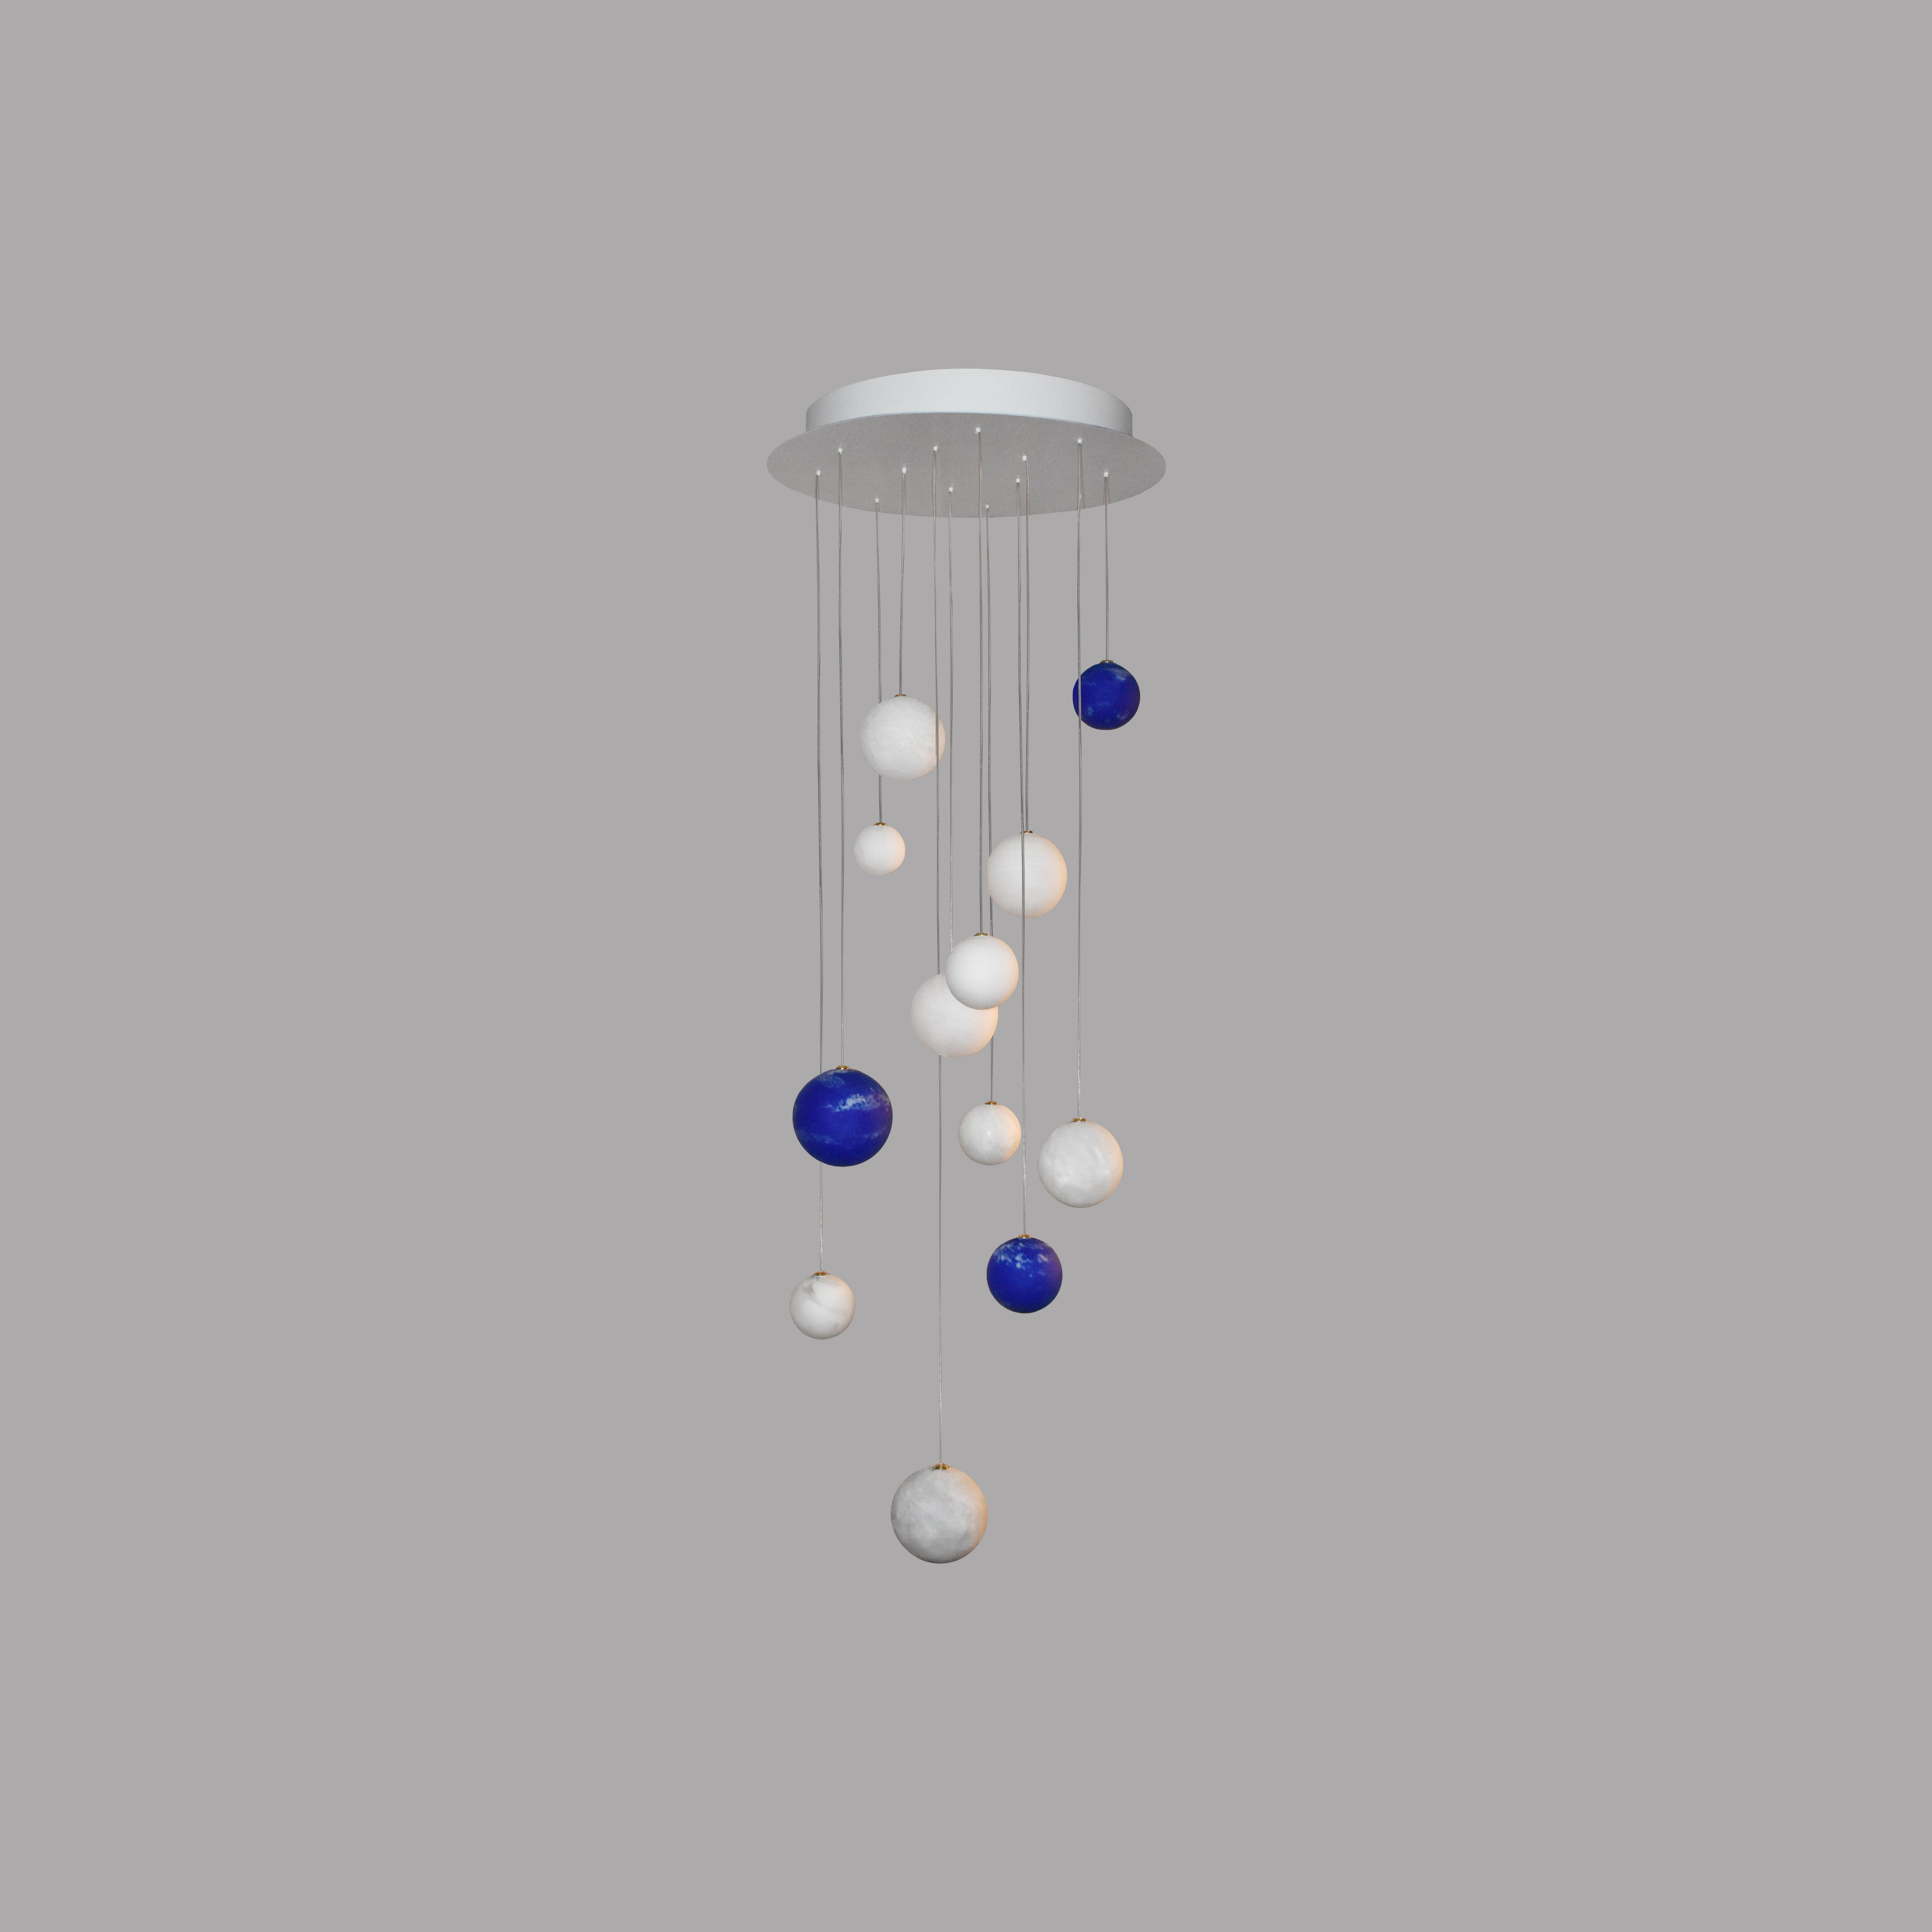 12 Planets And Ciels Chandelier by Ludovic Clément D’armont
Dimensions: Ø 60 x H 200 cm.
Materials: Blown glass and painted steel.

Every creation of Ludovic Clément d’Armont can be made to order in any requested dimensions. 12 Planets of choice.